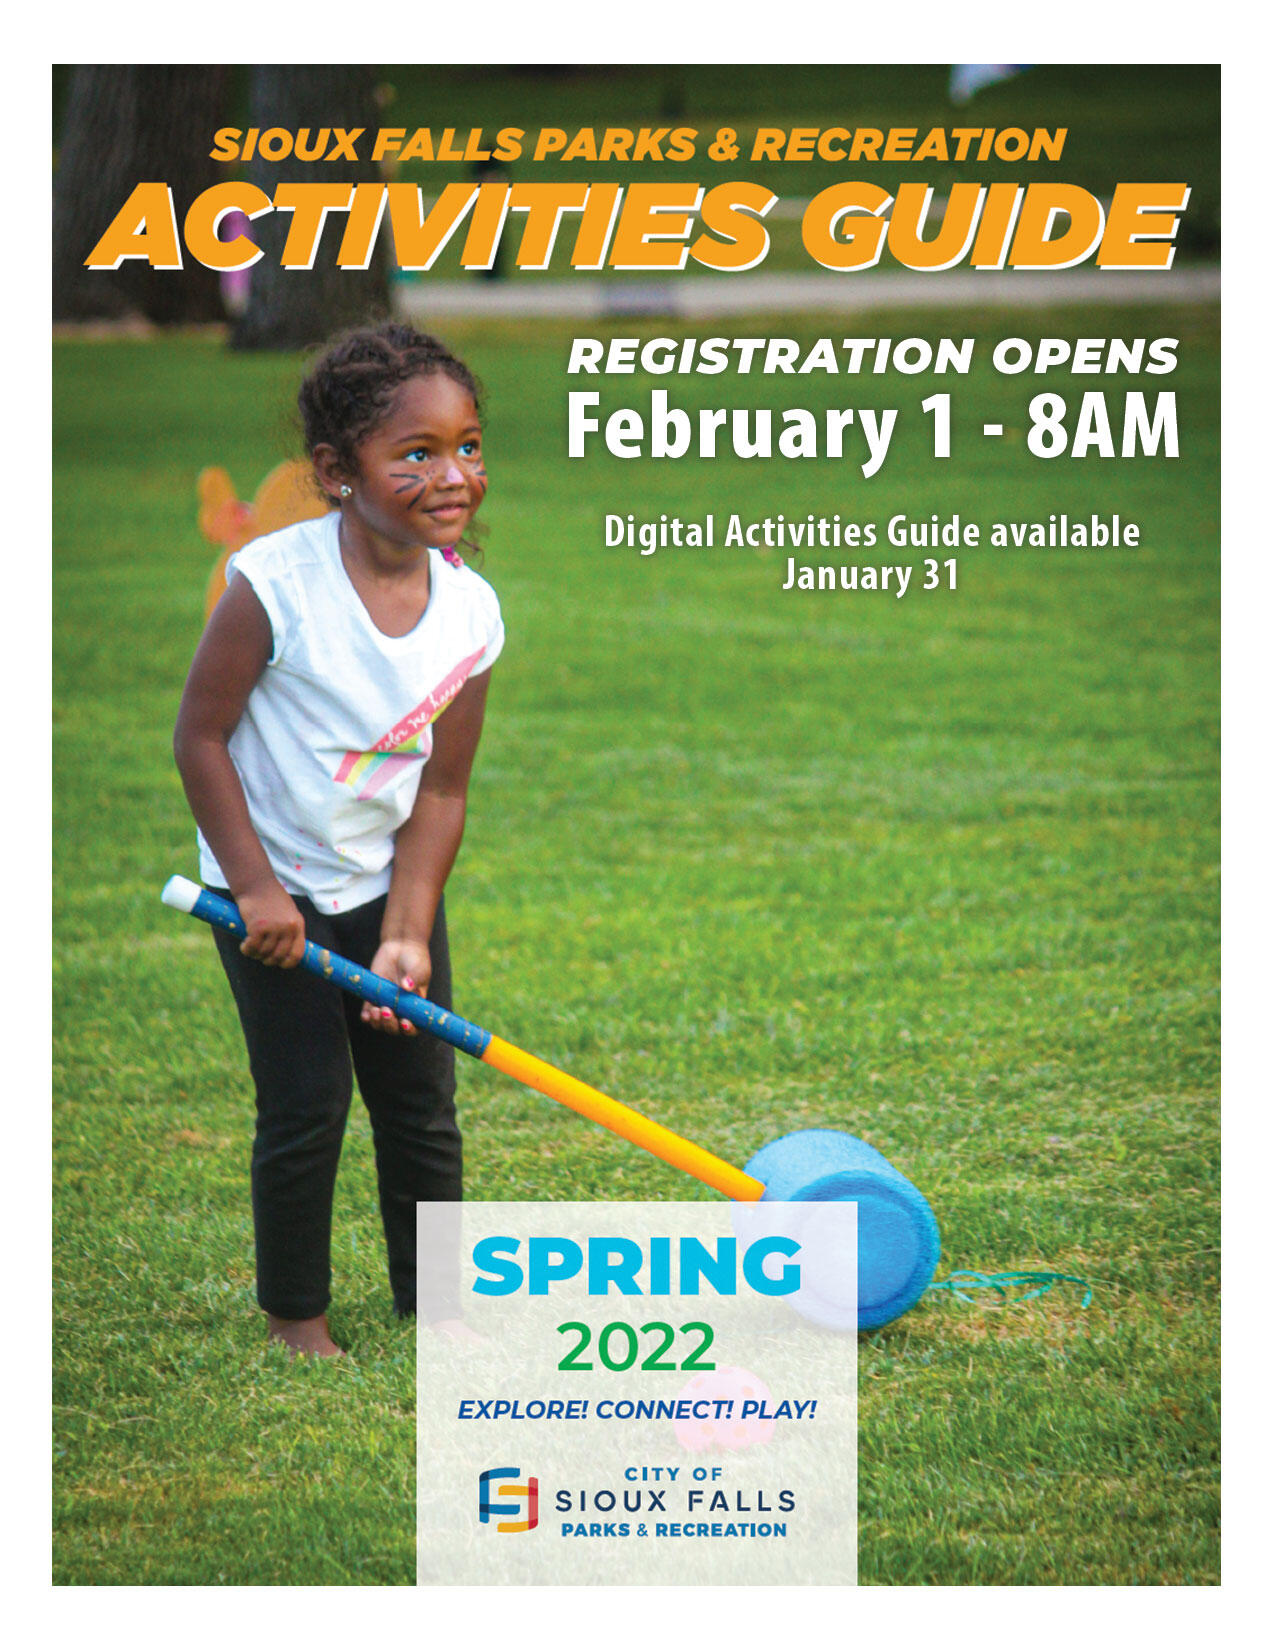 Now Available! Spring 2022 Activities Guide Sioux Falls Parks